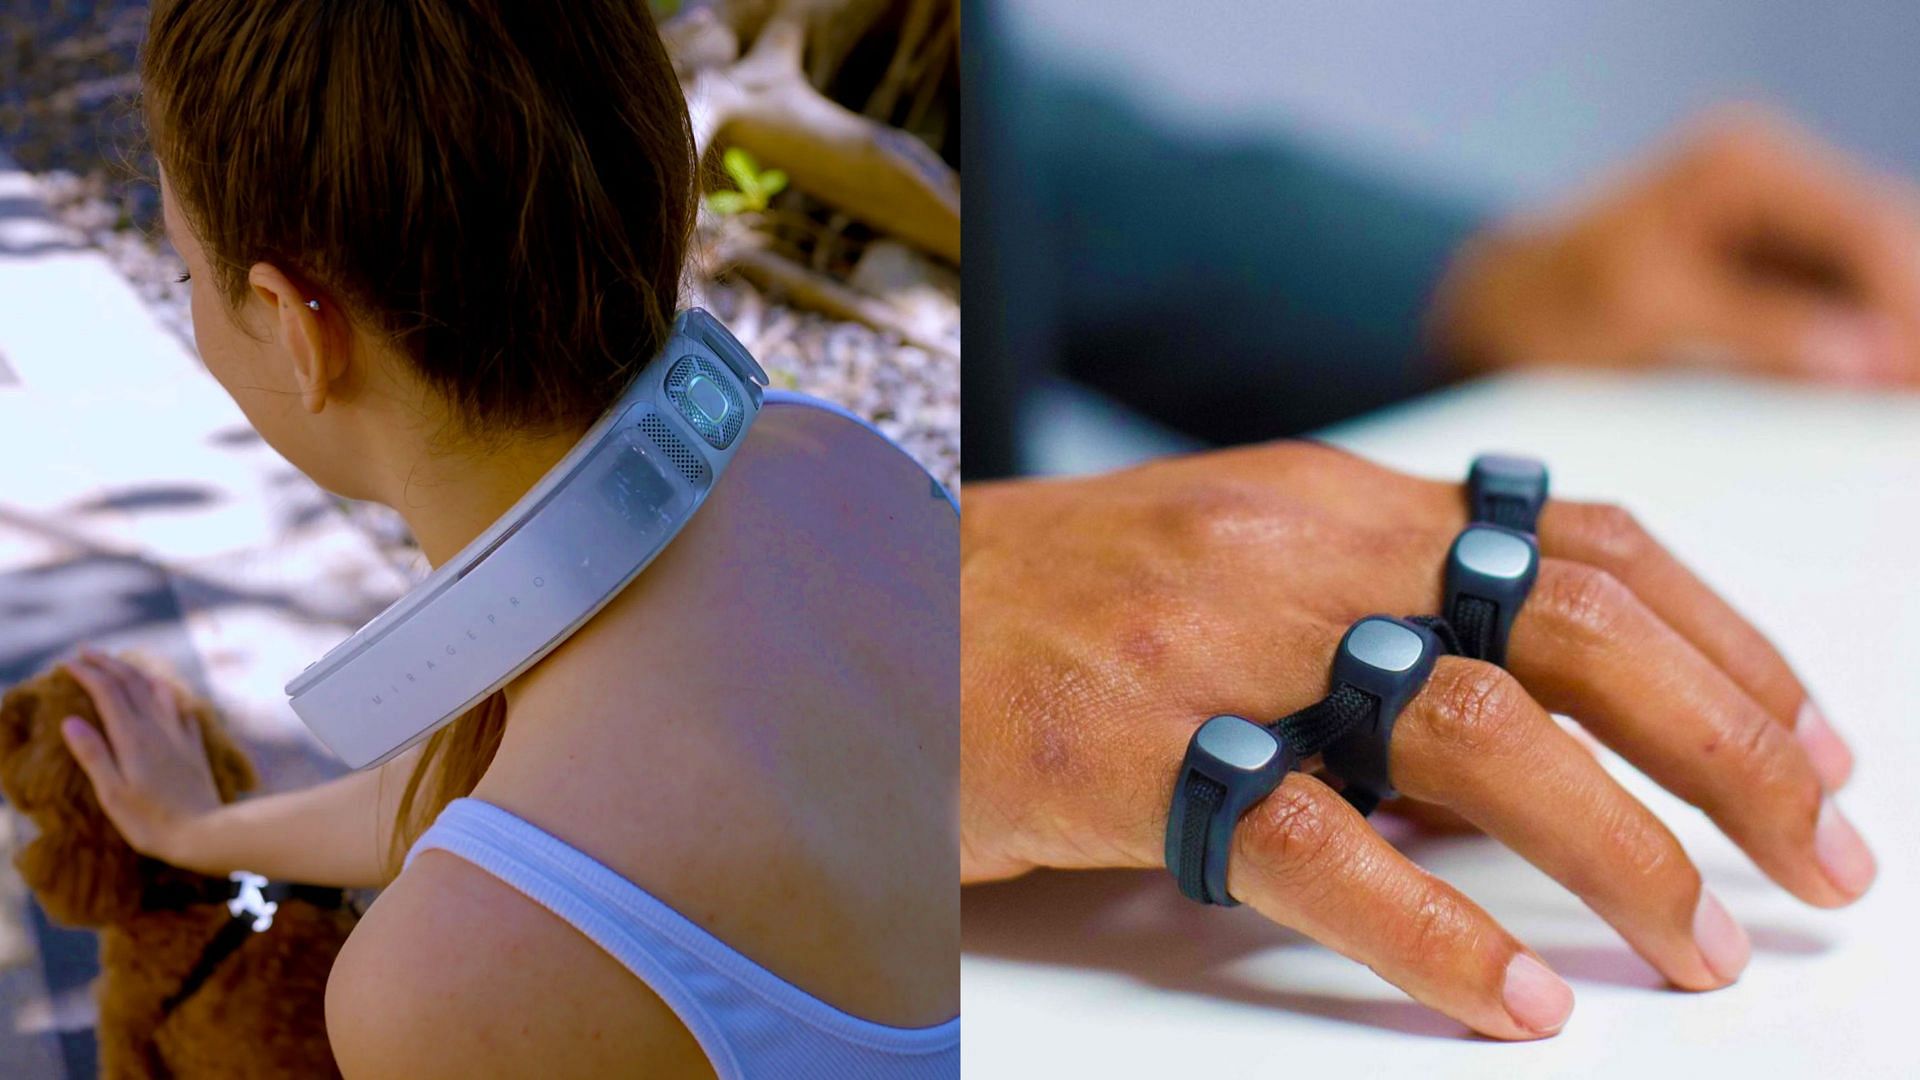 The best wearable technology devices that are both strange and unique. (Image via Sportskeeda)